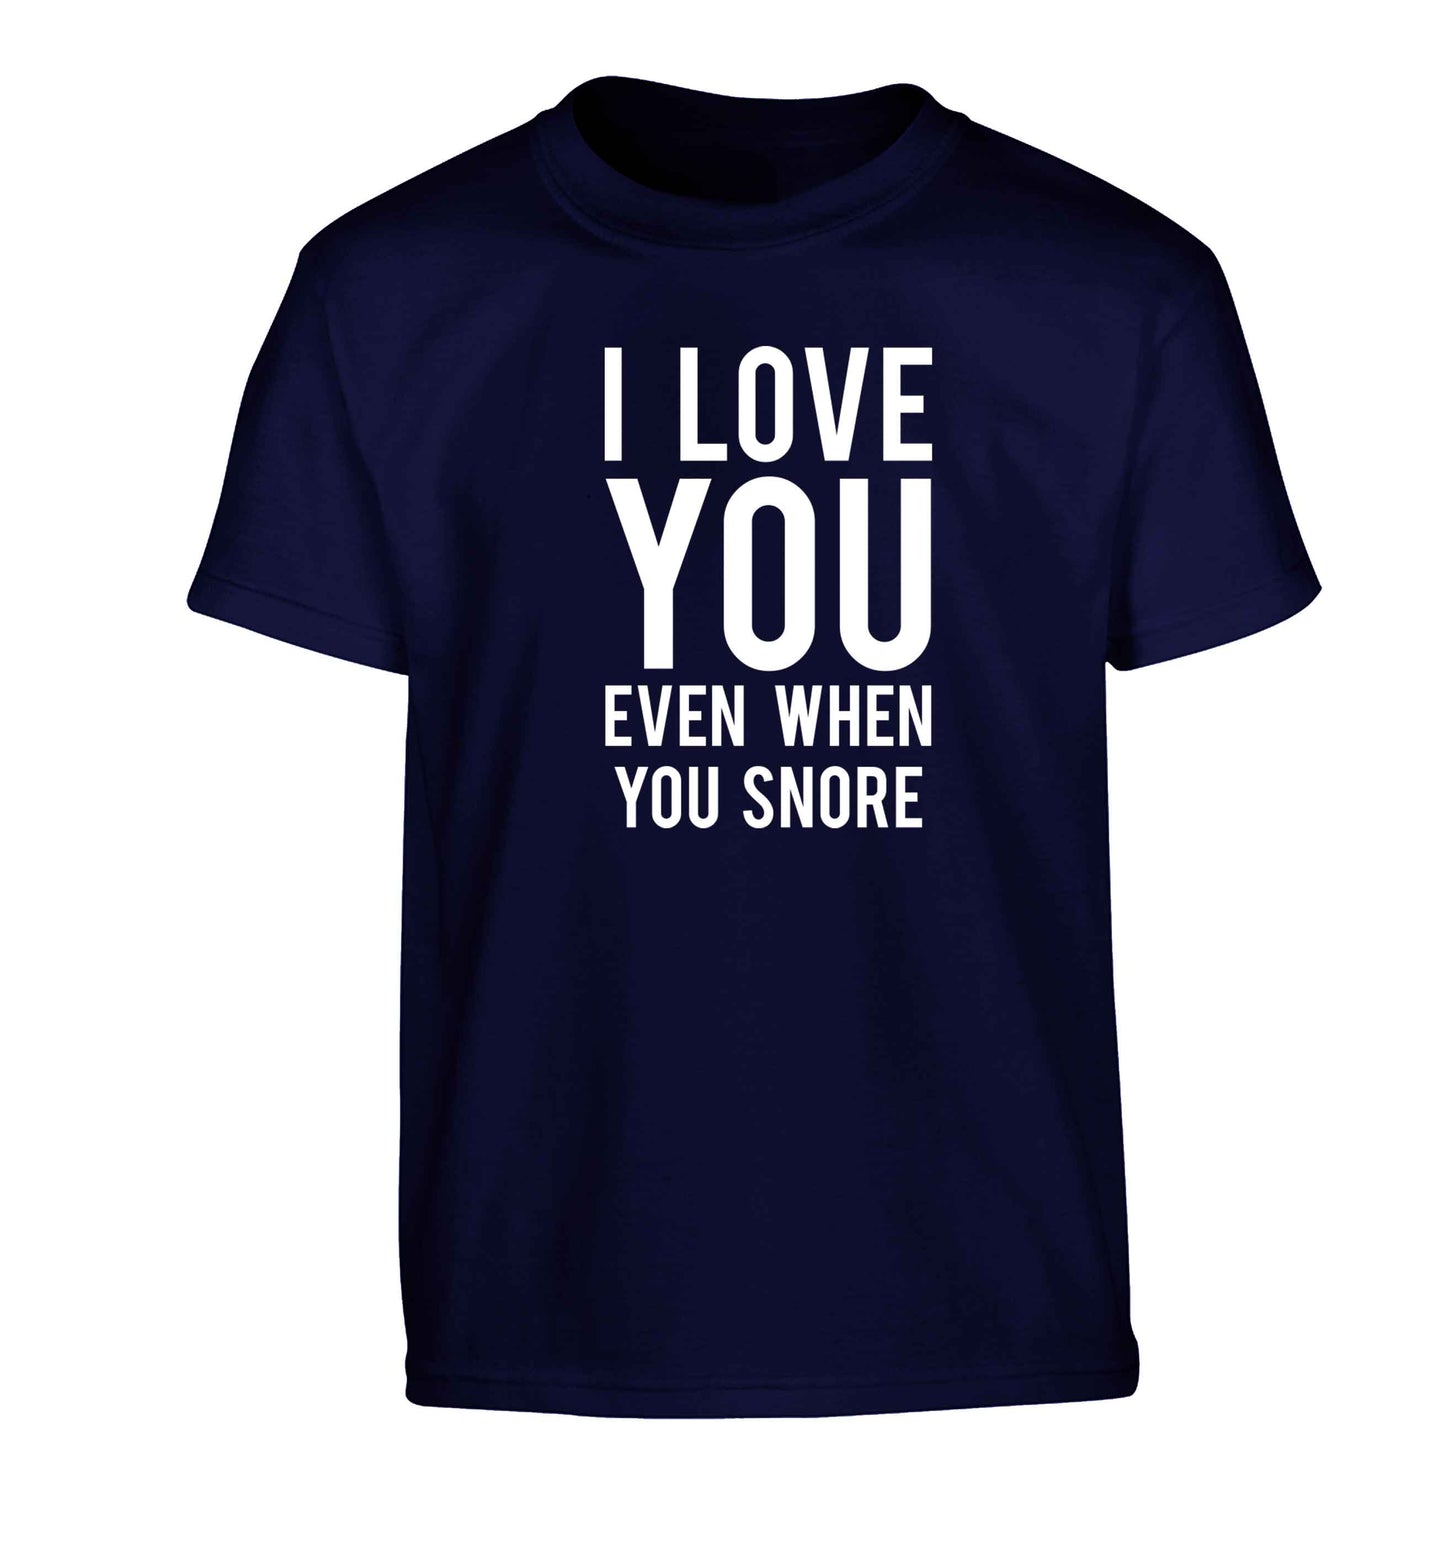 I love you even when you snore Children's navy Tshirt 12-13 Years